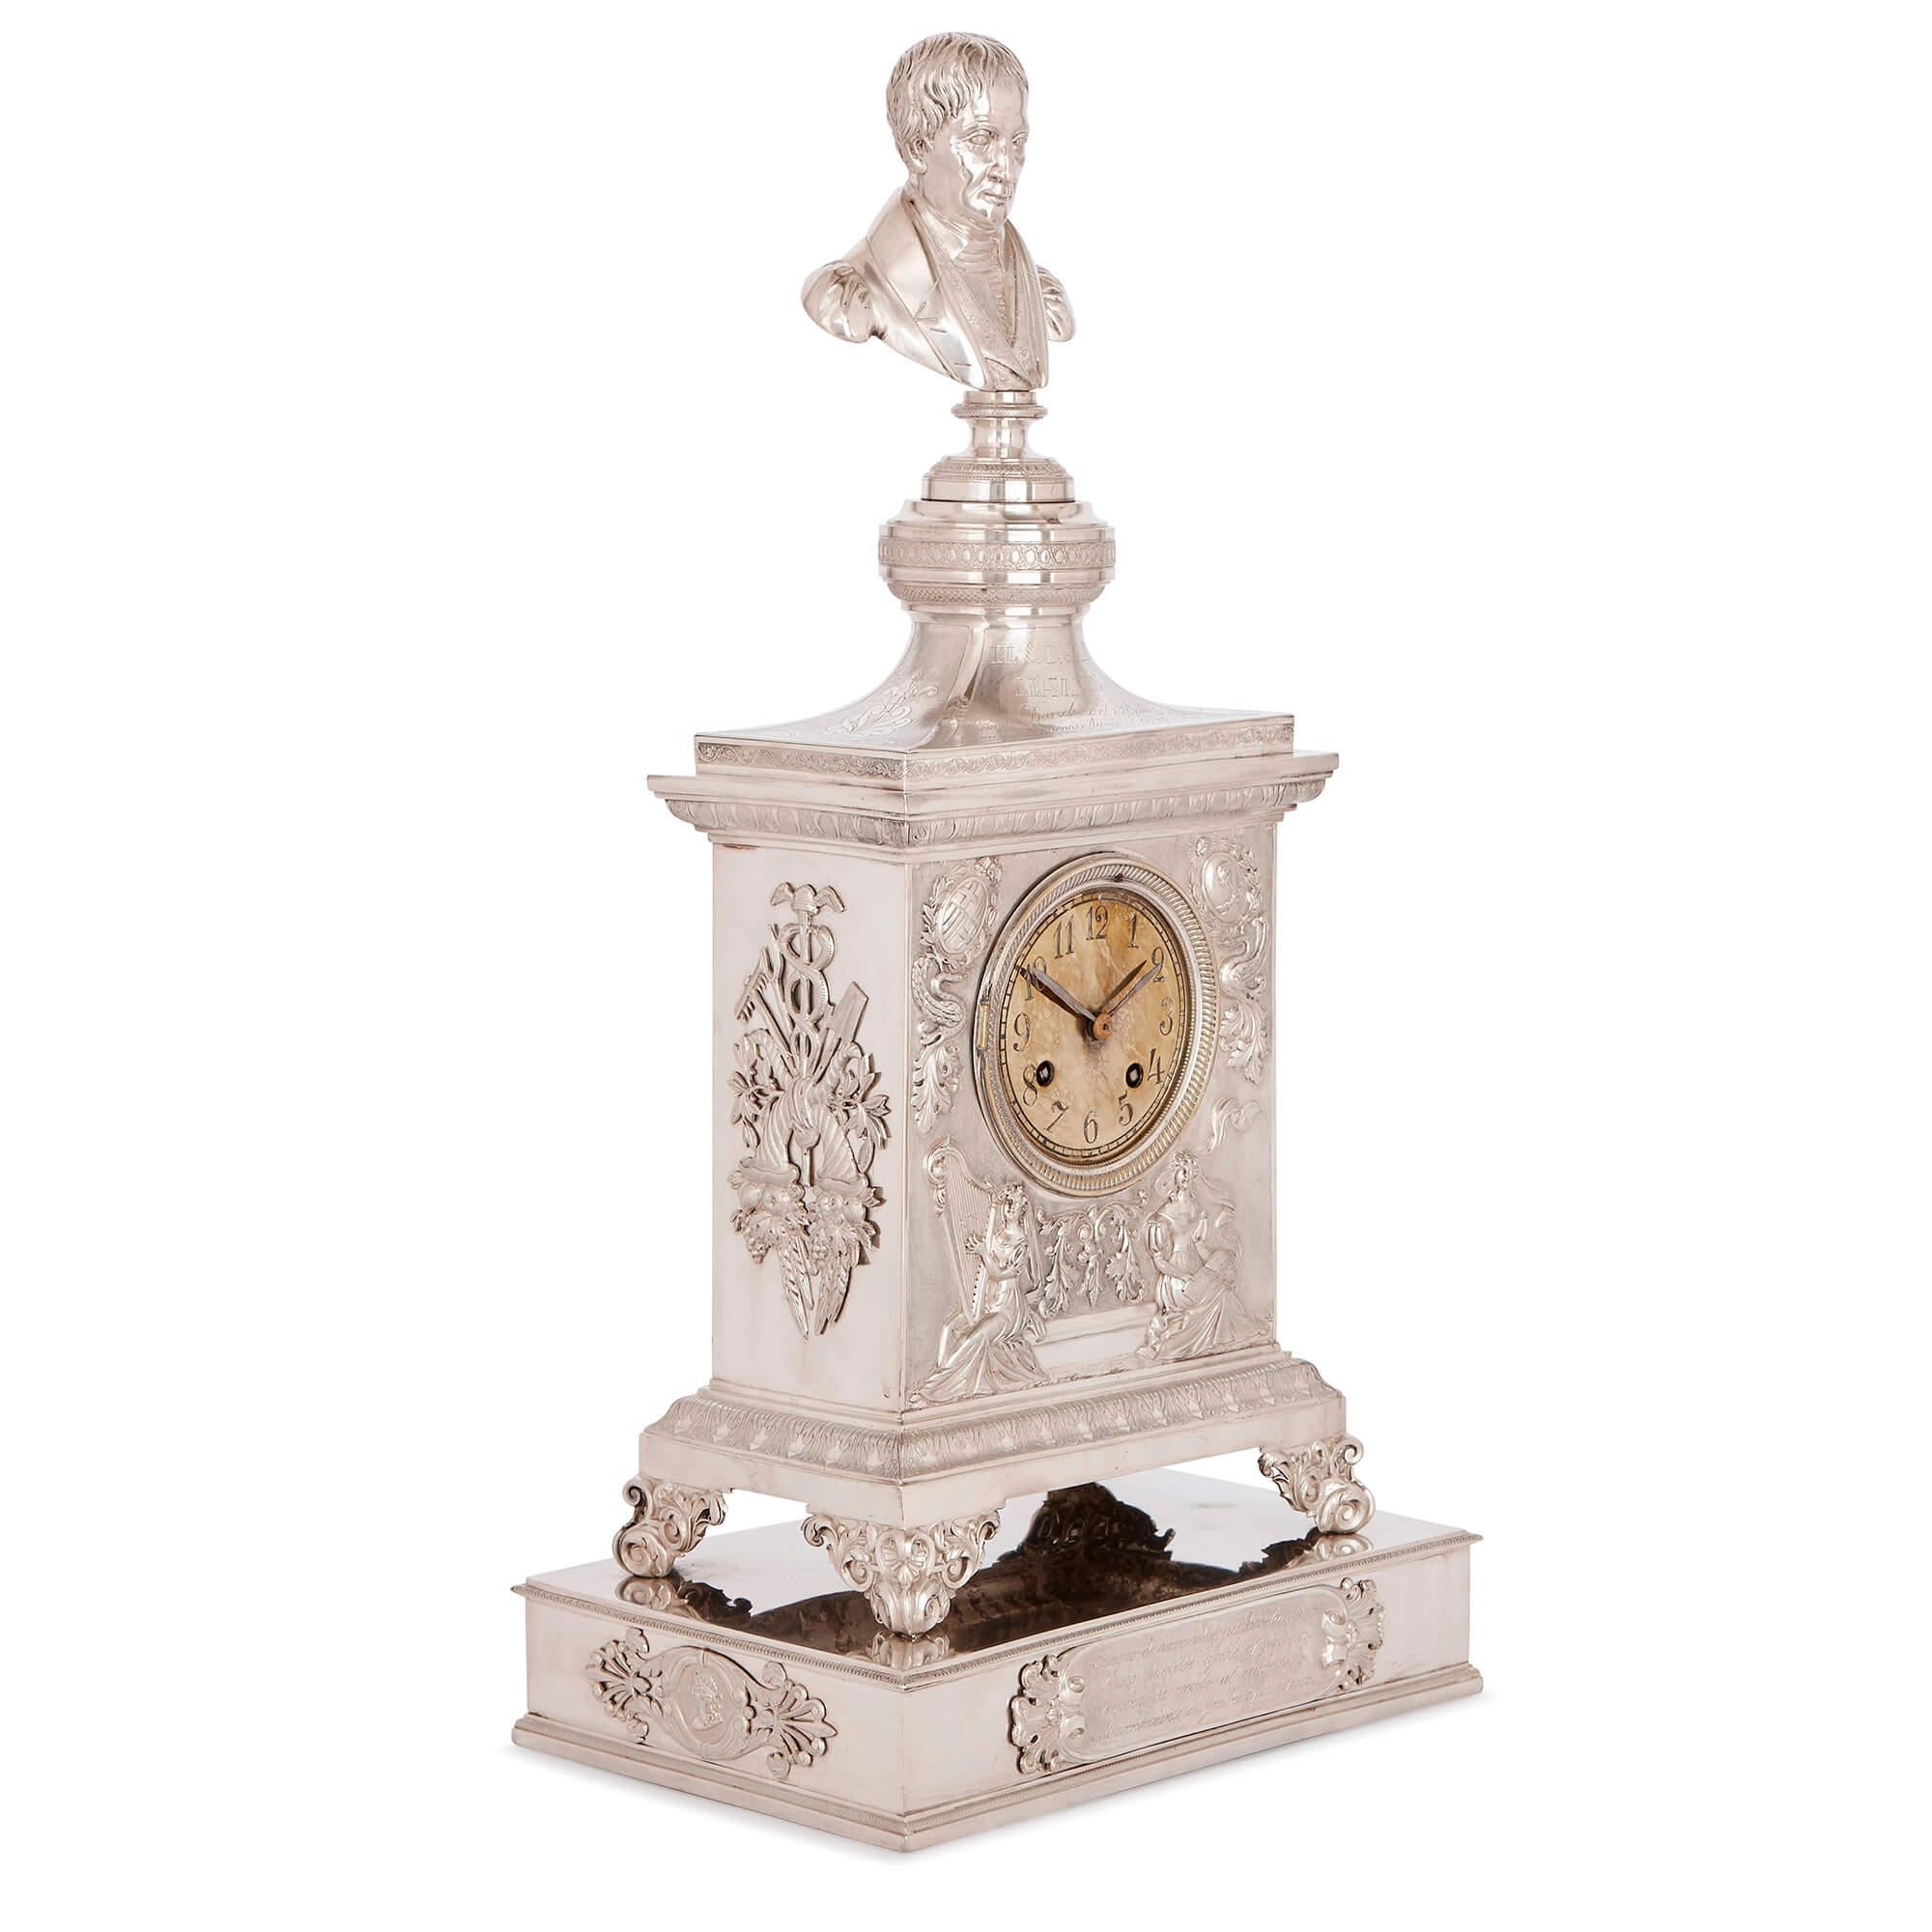 This charming silver mantel clock has a fascinating history, having probably been made as a commemorative item. It dates from the 19th century in Spain, and is the work of Spanish silversmith Jacinto Carreras (active 19th Century), who has produced